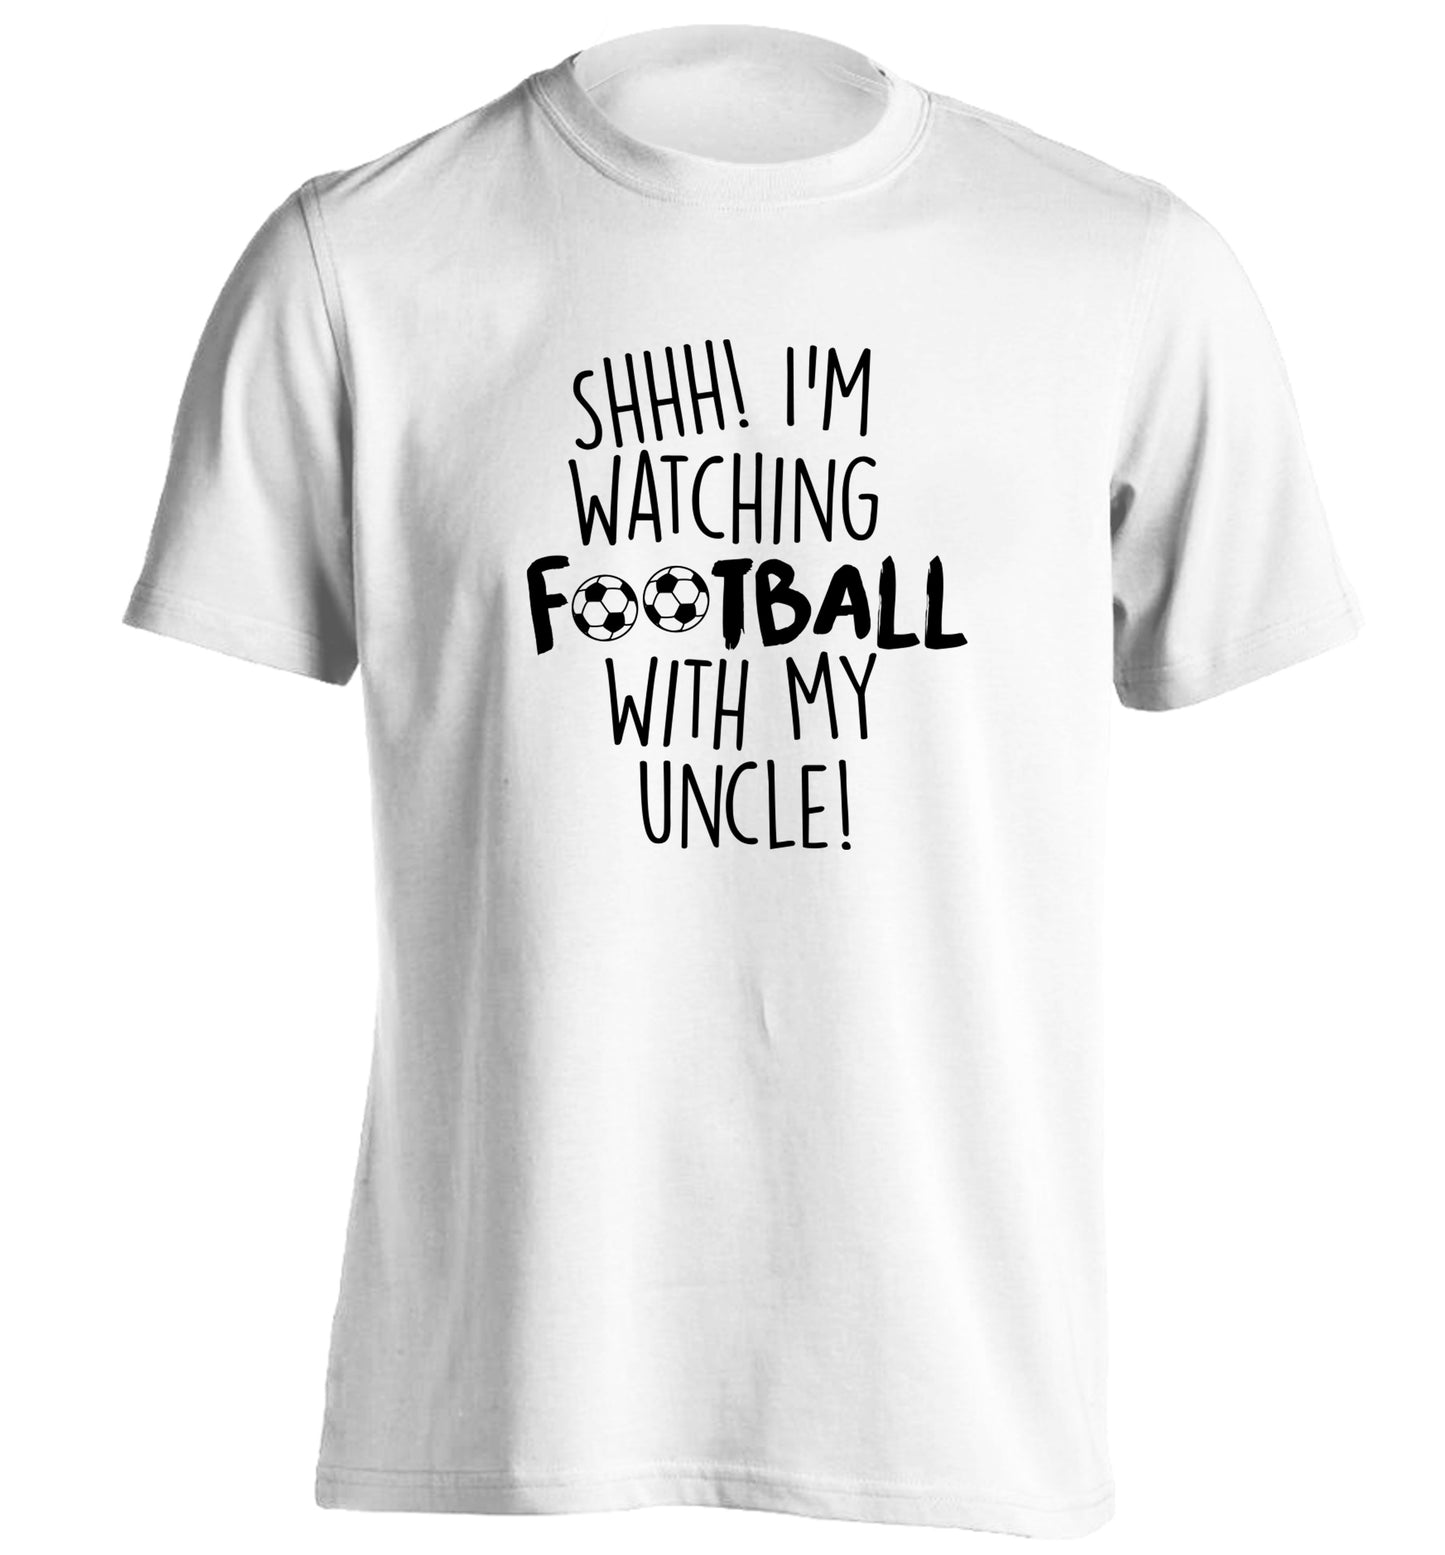 Shhh I'm watching football with my uncle adults unisexwhite Tshirt 2XL